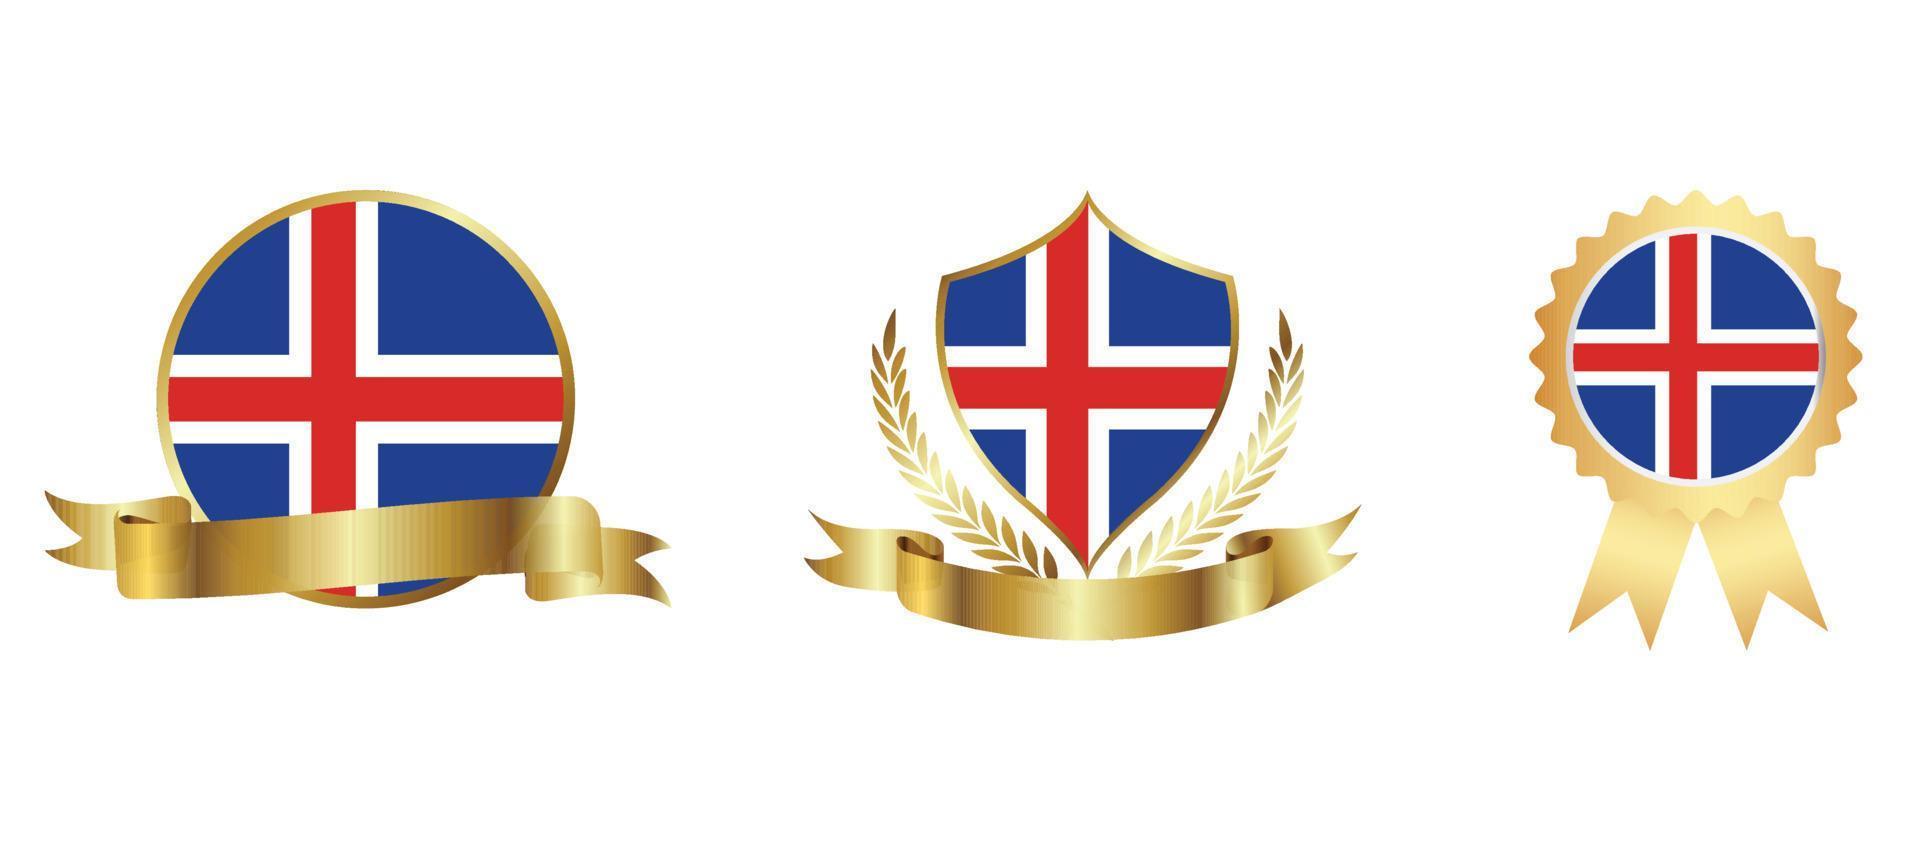 Iceland flag icon . web icon set . icons collection flat. Simple vector illustration.